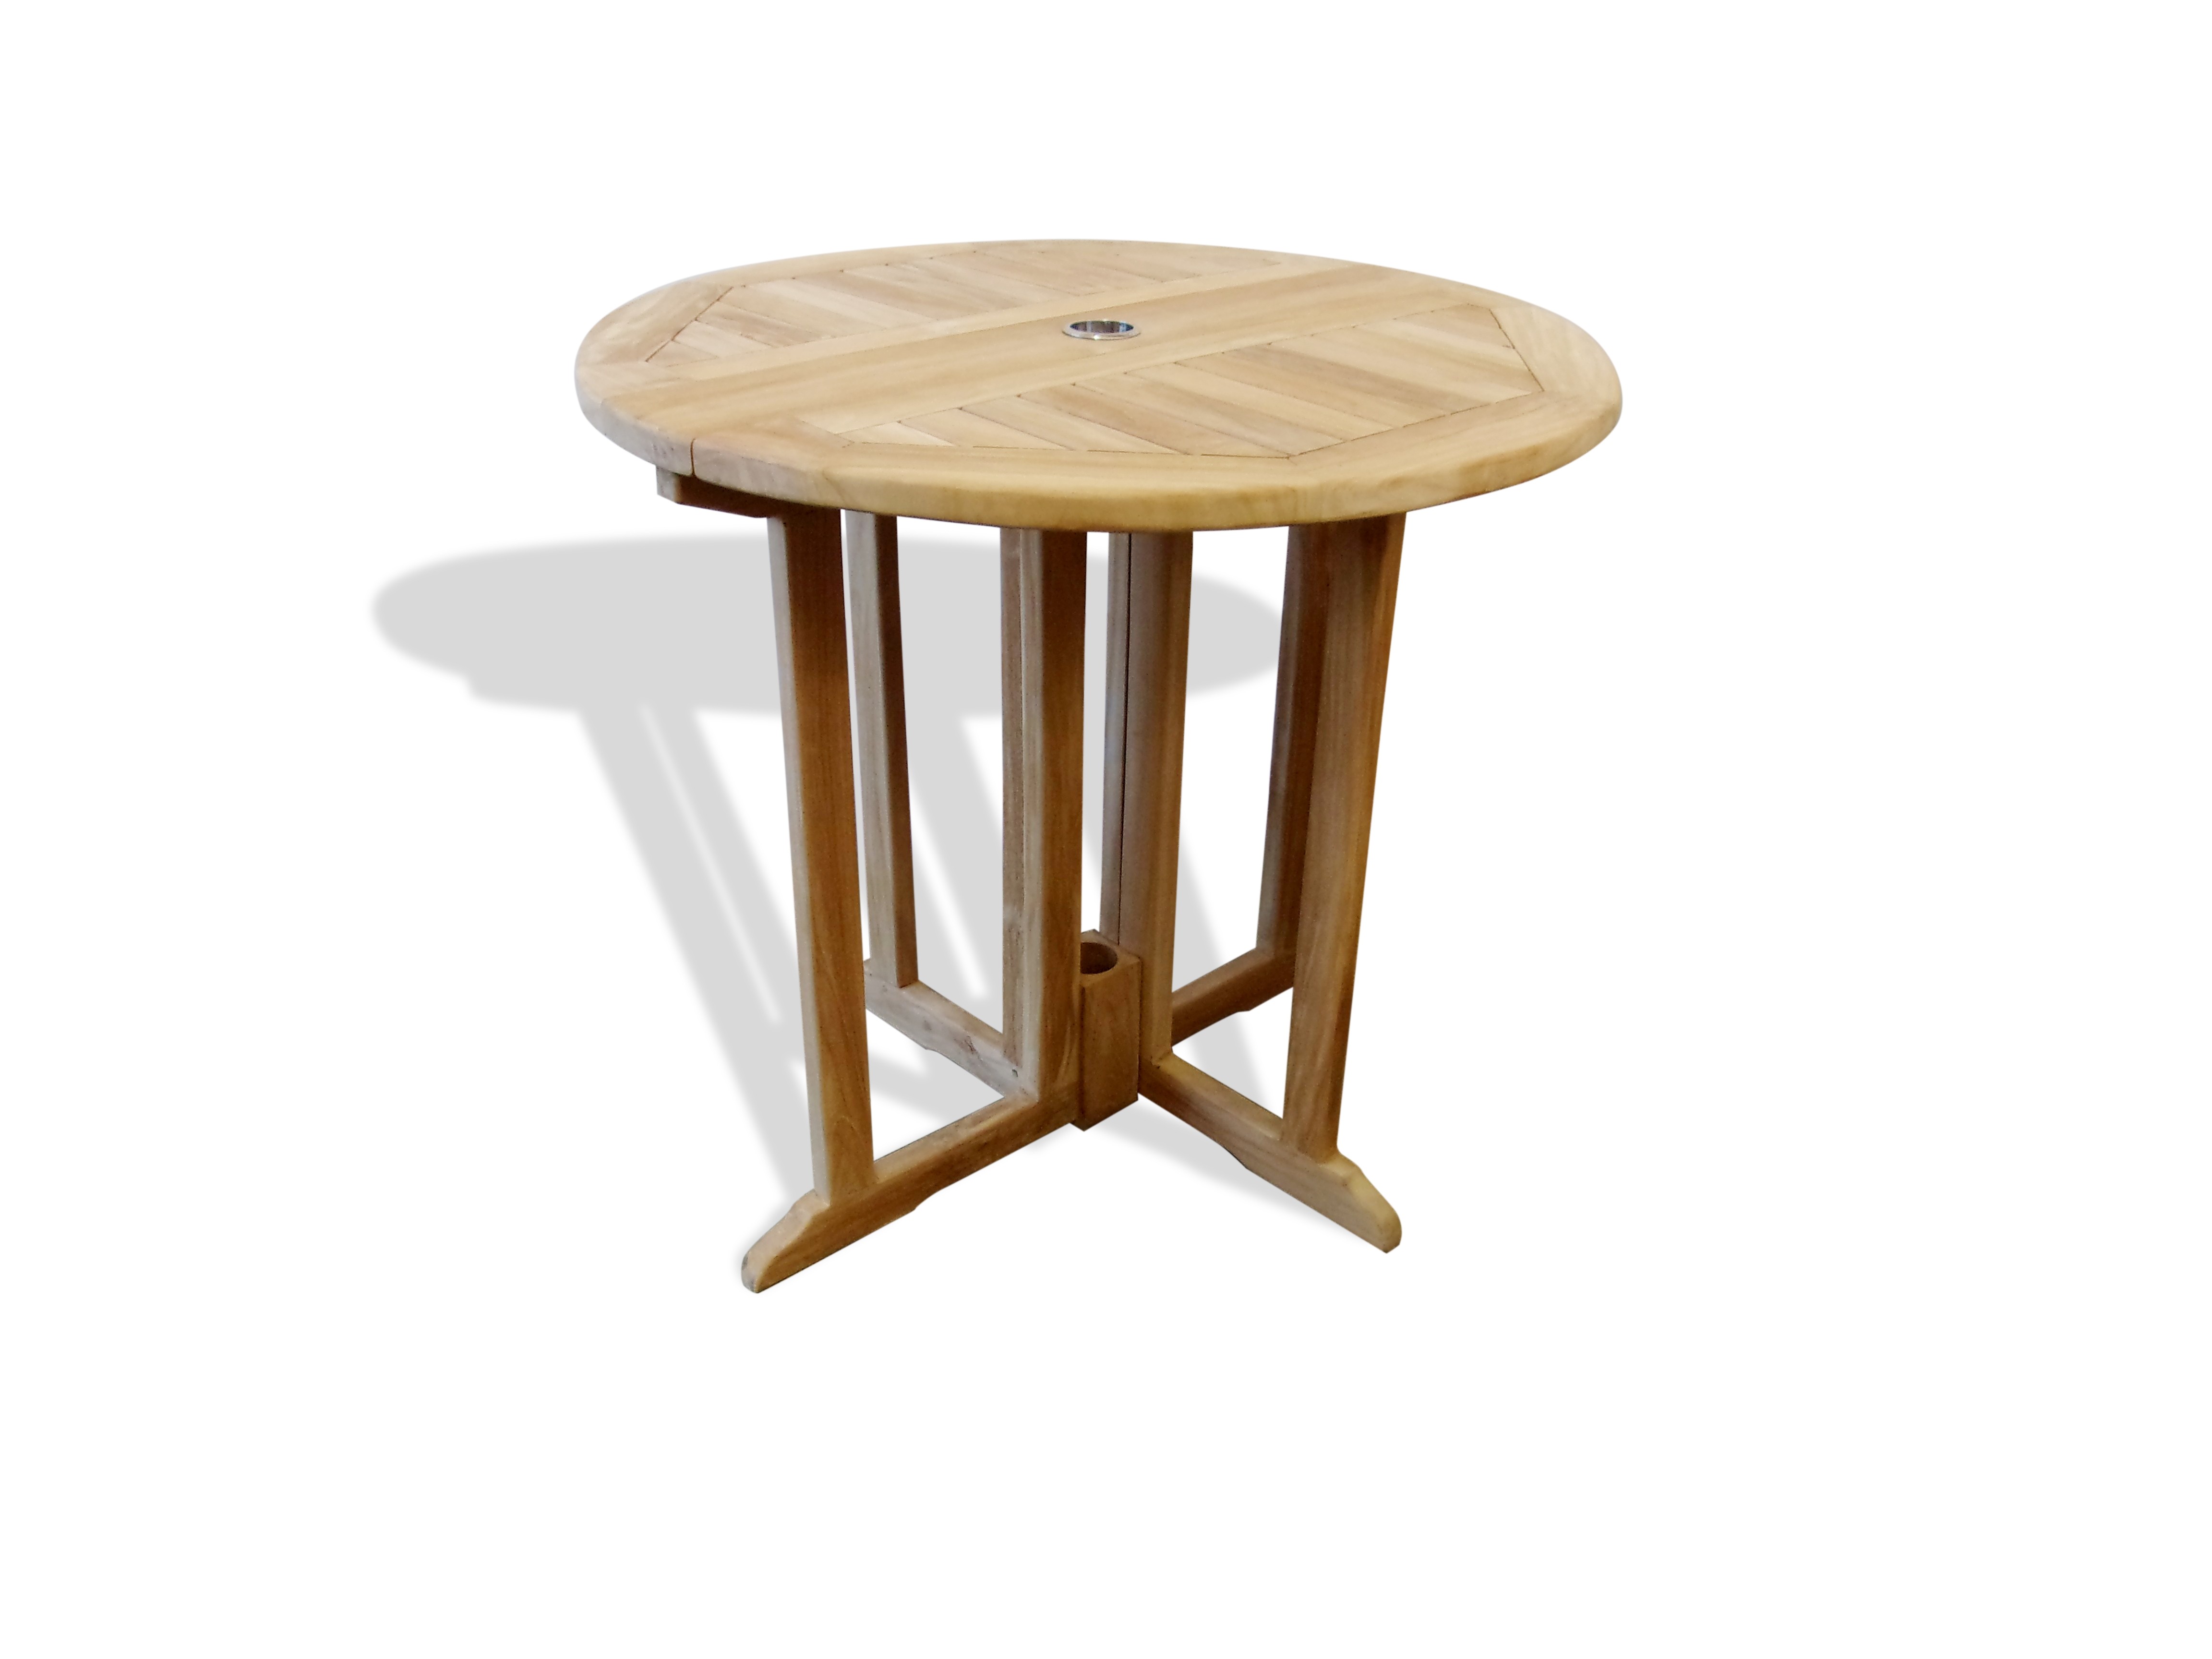 Grade A Teak Barcelone 32" Round Drop Leaf Folding Table ...use with 1 Leaf Up or 2.... Makes 2 different tables